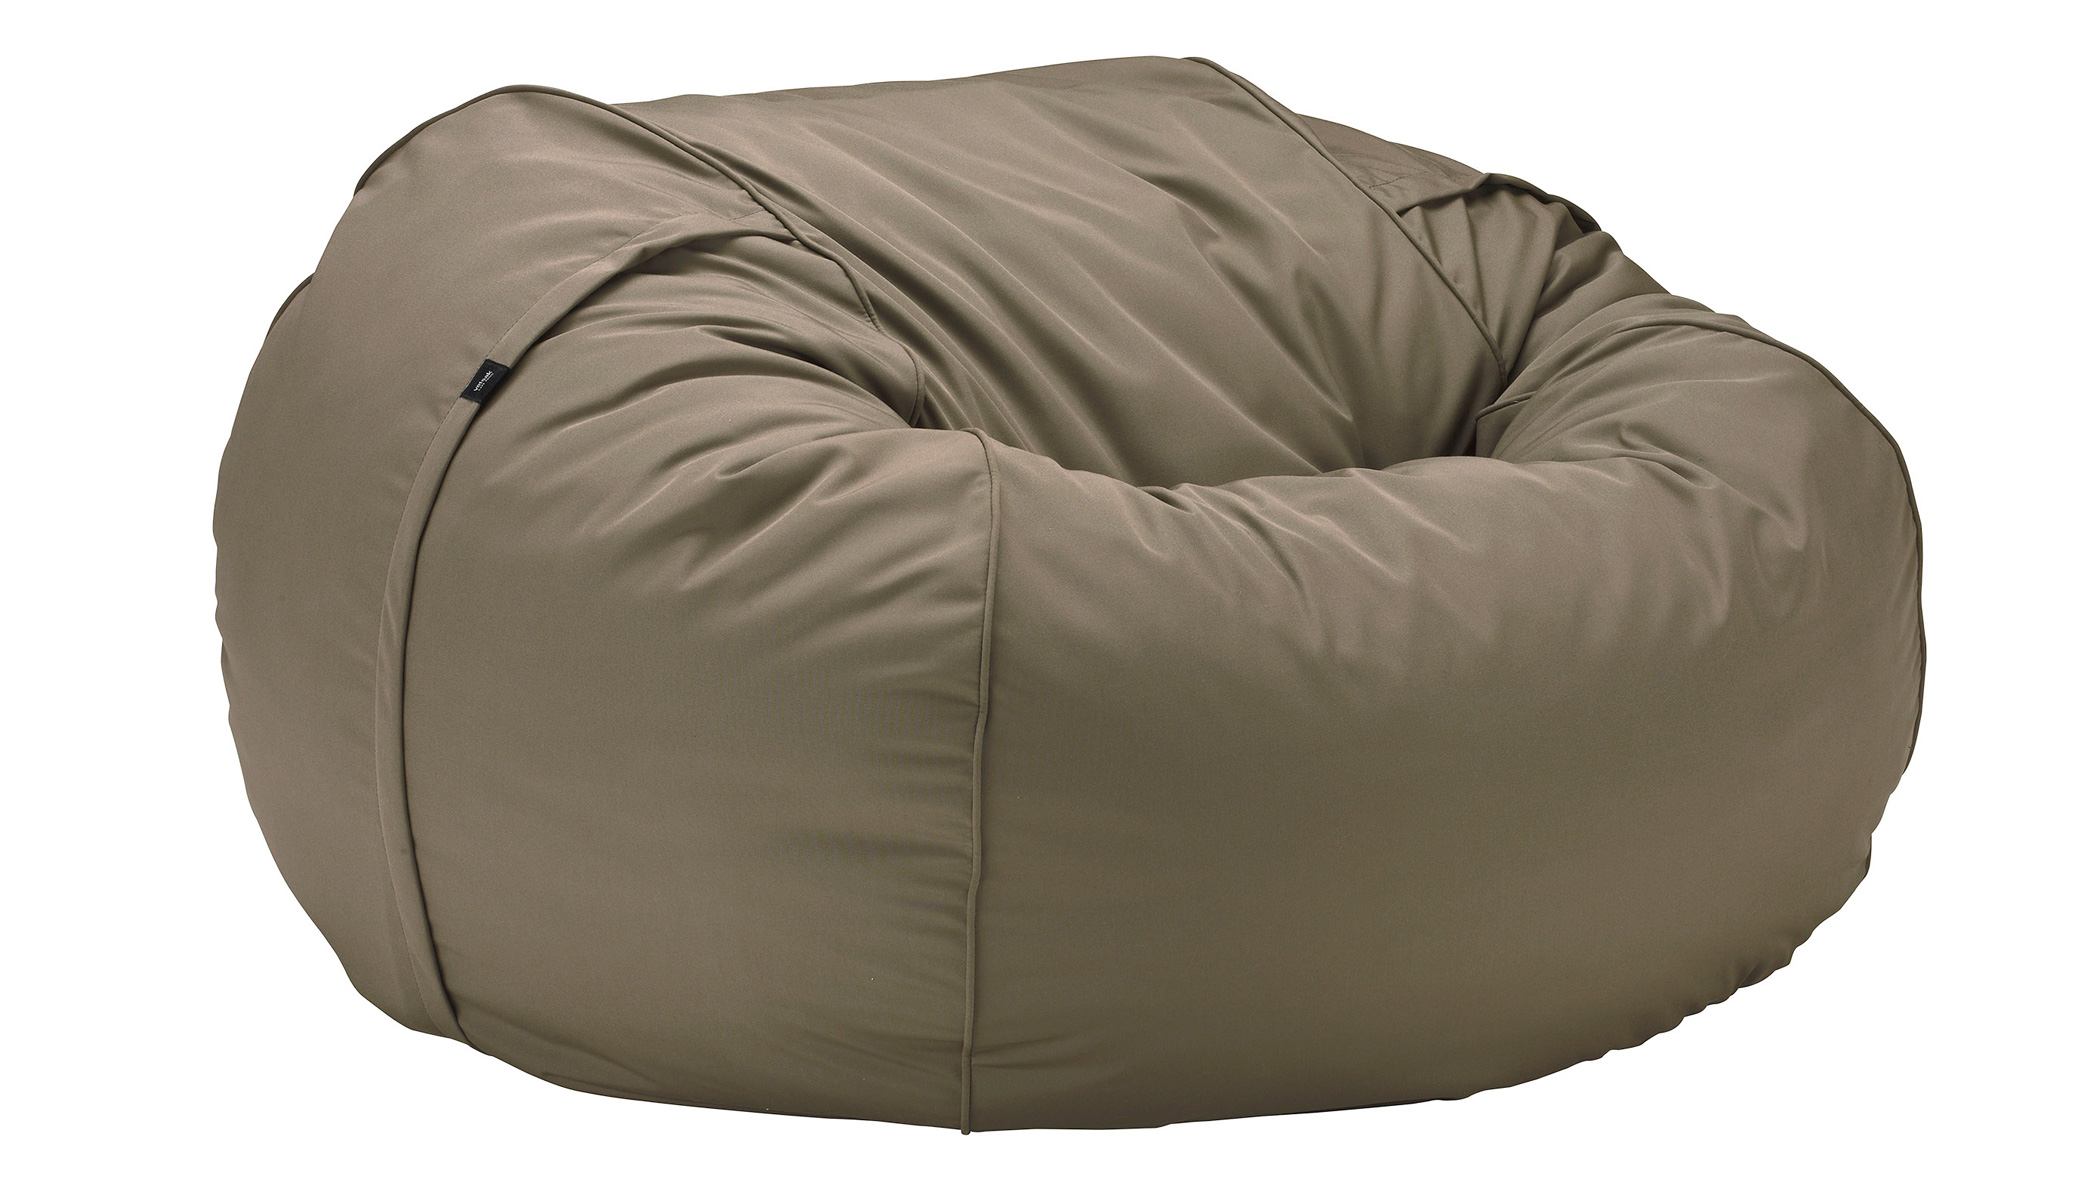  Beanbag Large Outdoor stone